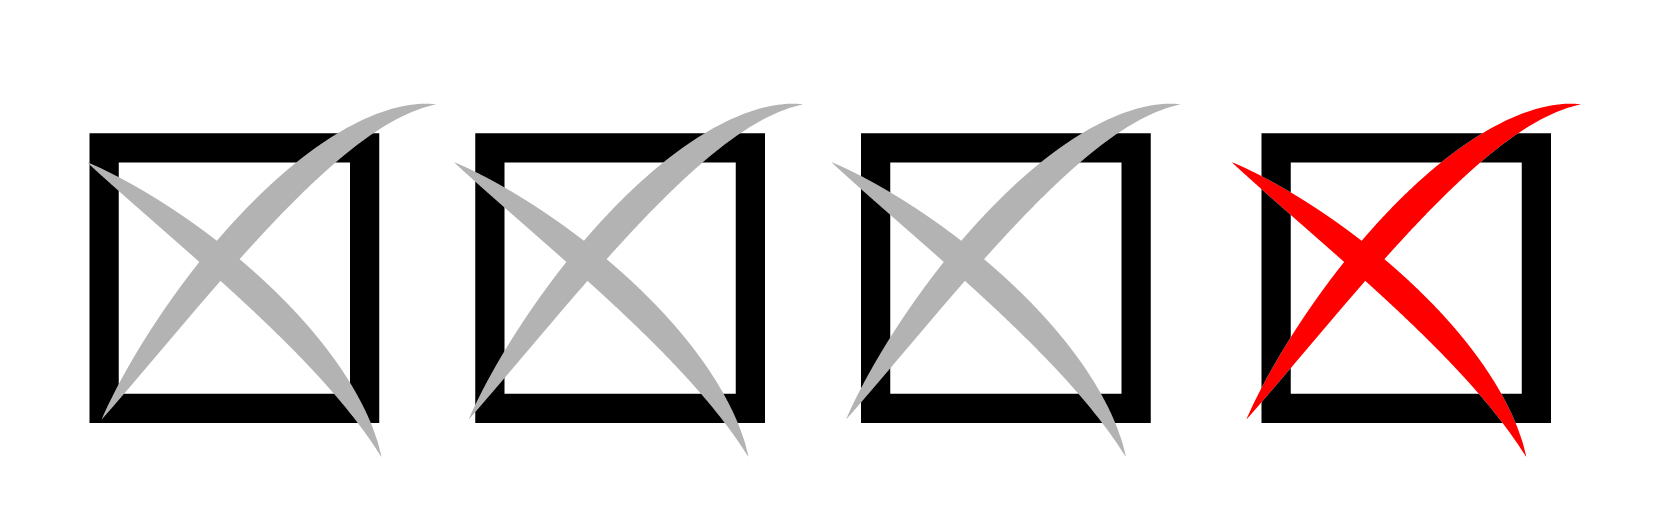 boxes with X's inside them